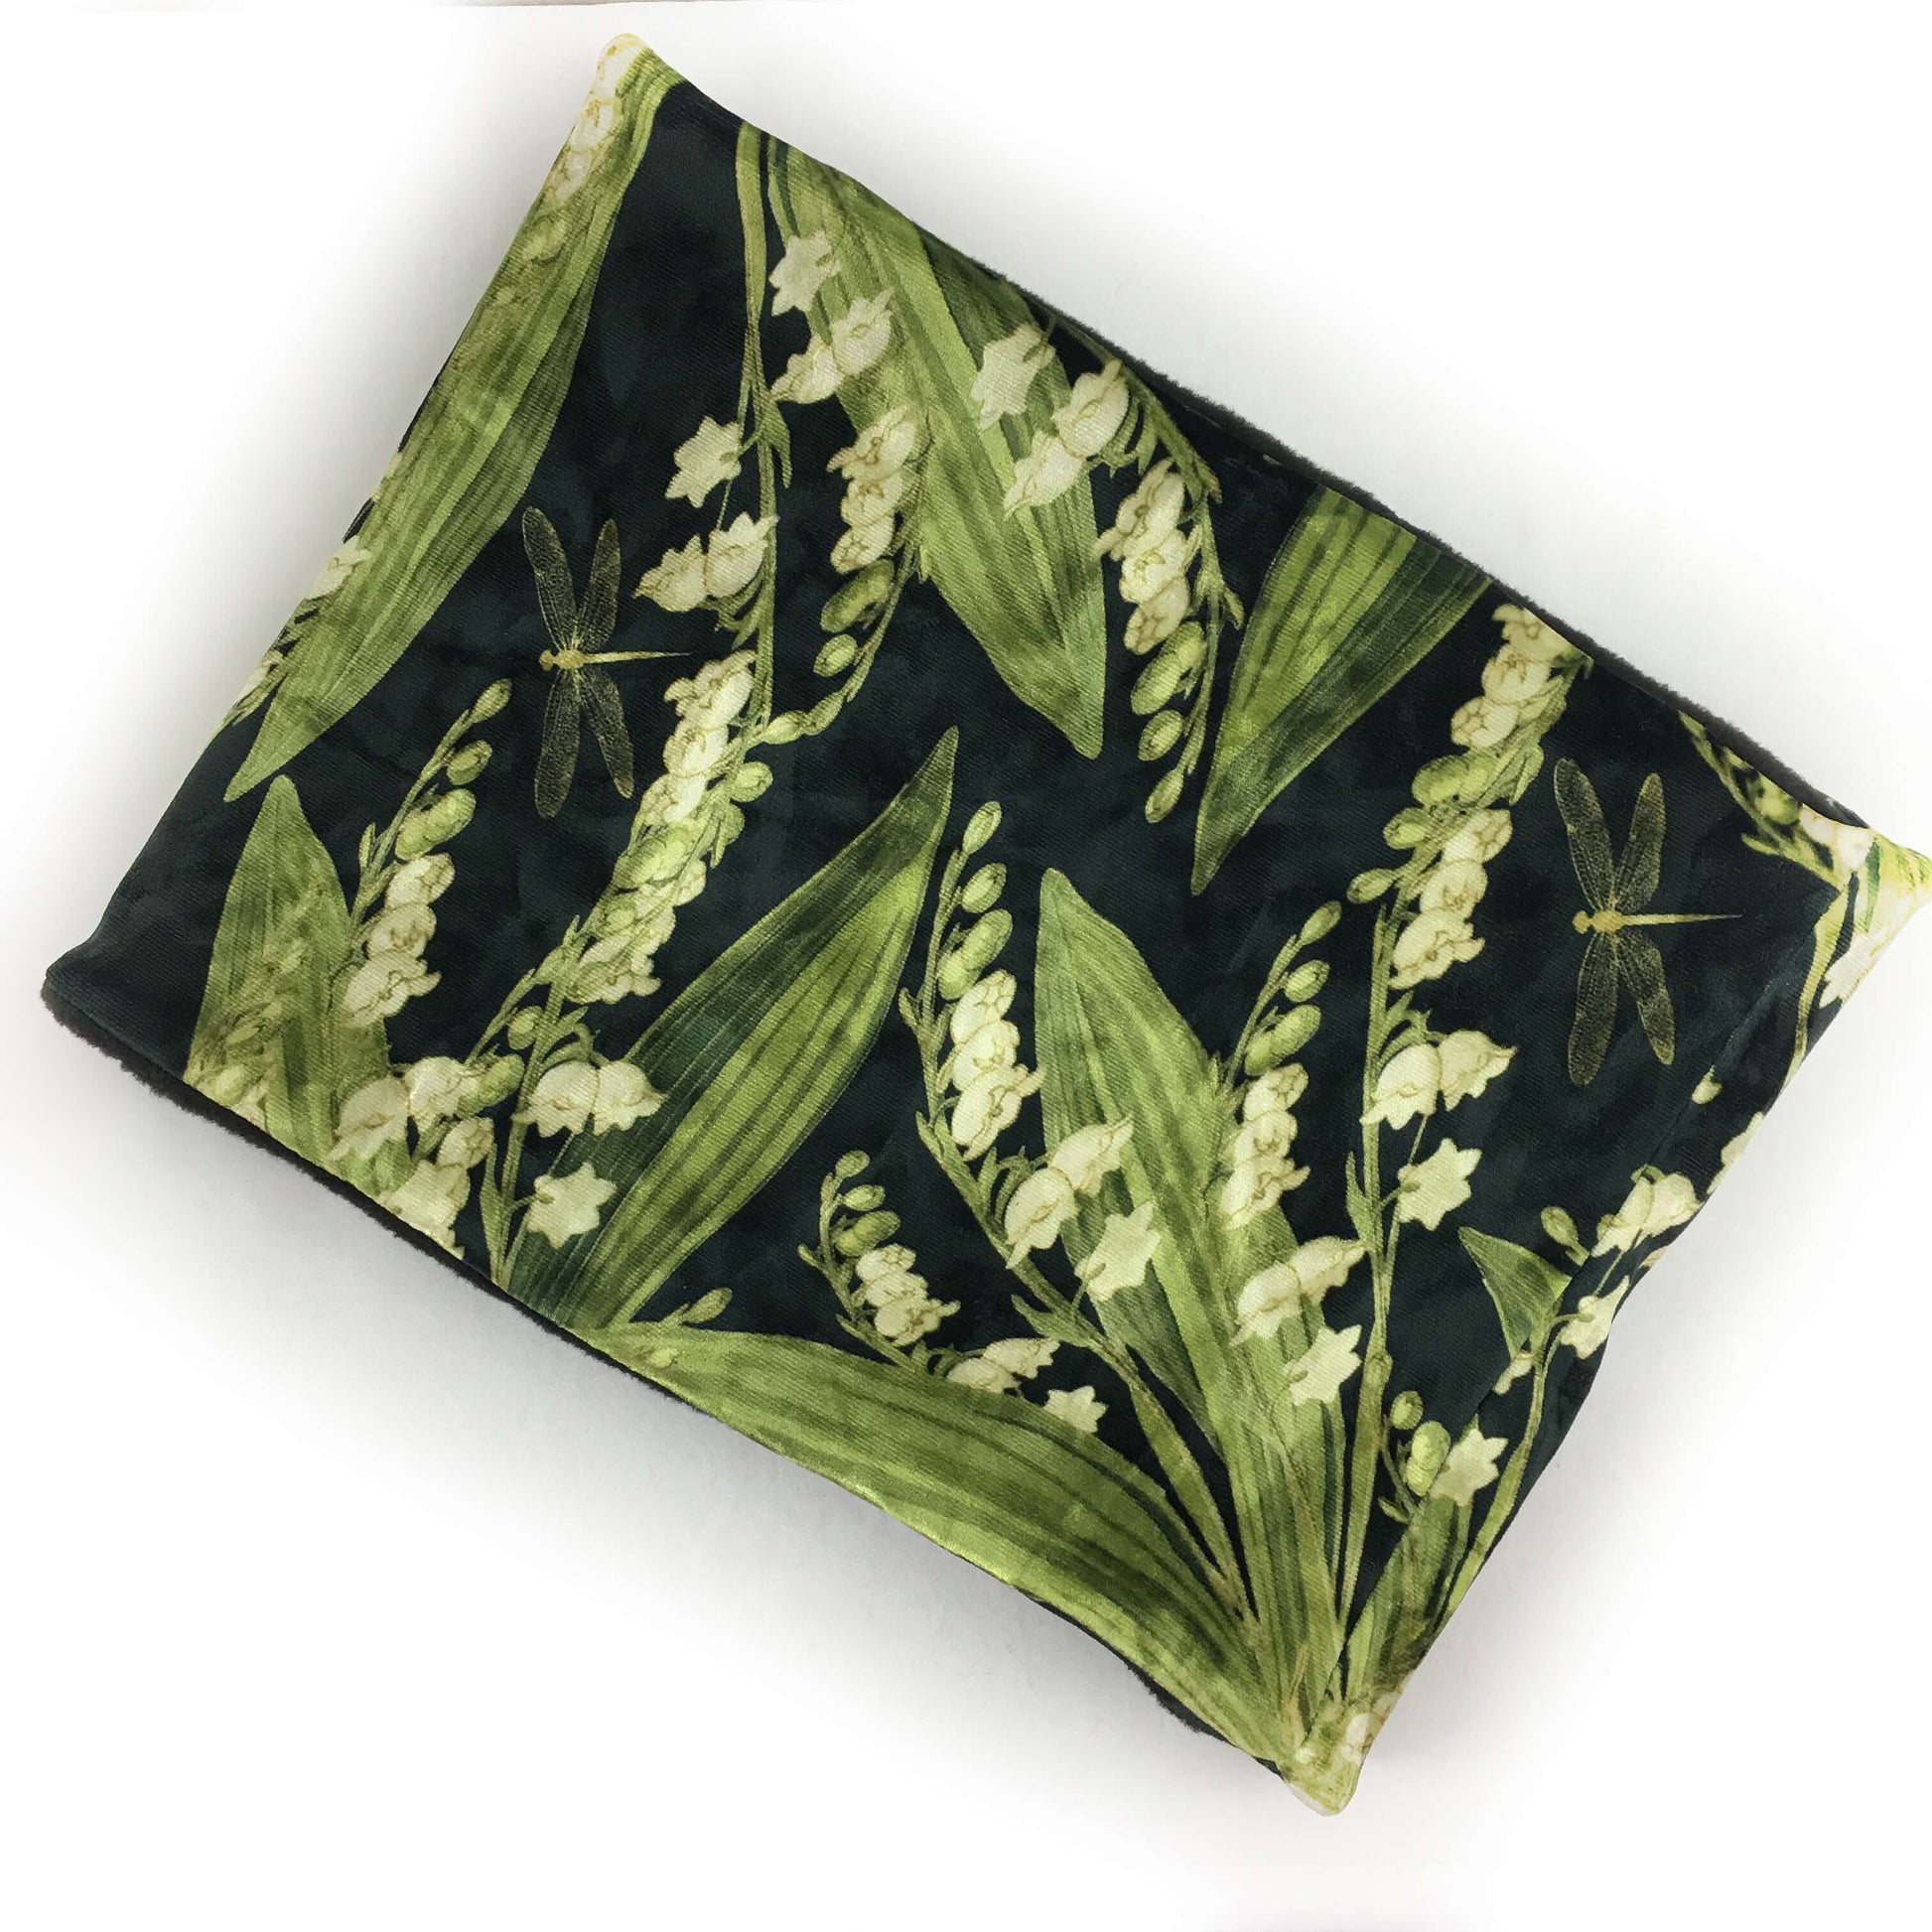 Lily-of-the-Valley and Dragonflies Fleece lined Velour Gaiter